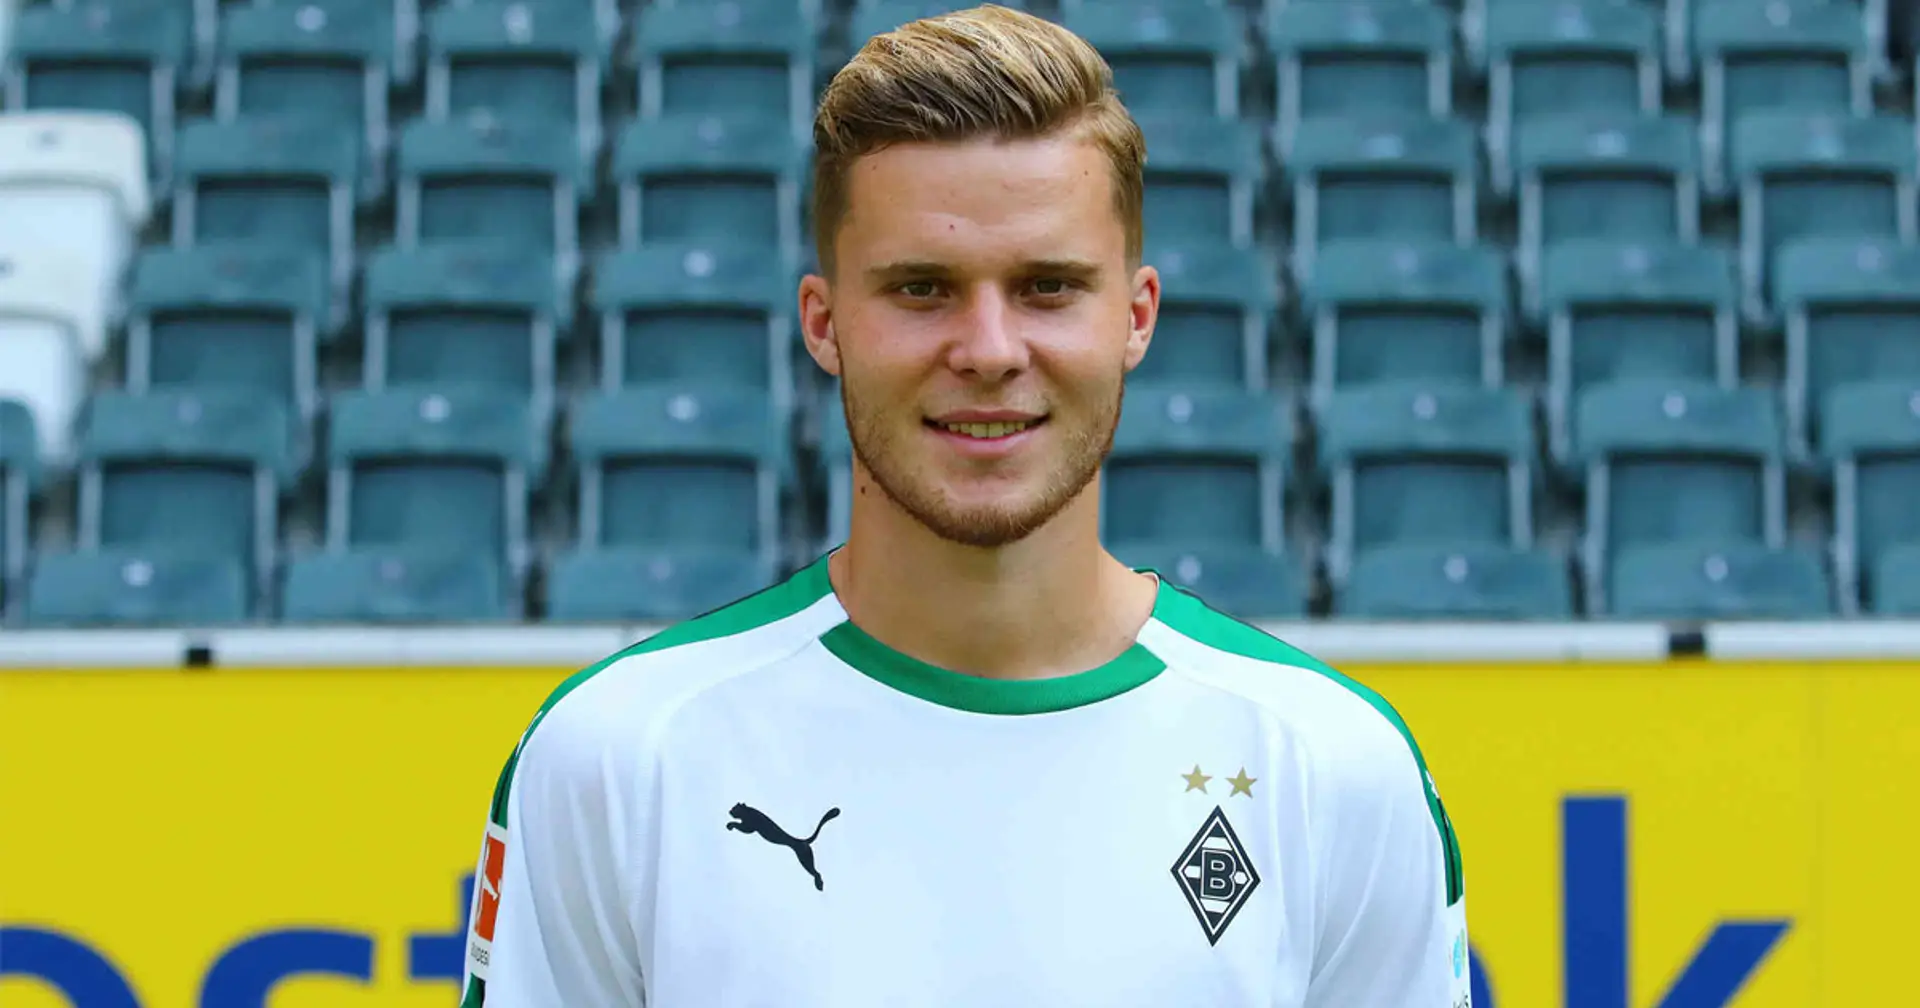 New John Stones? 7 things you should know about Arsenal-linked Gladbach defender Nico Elvedi